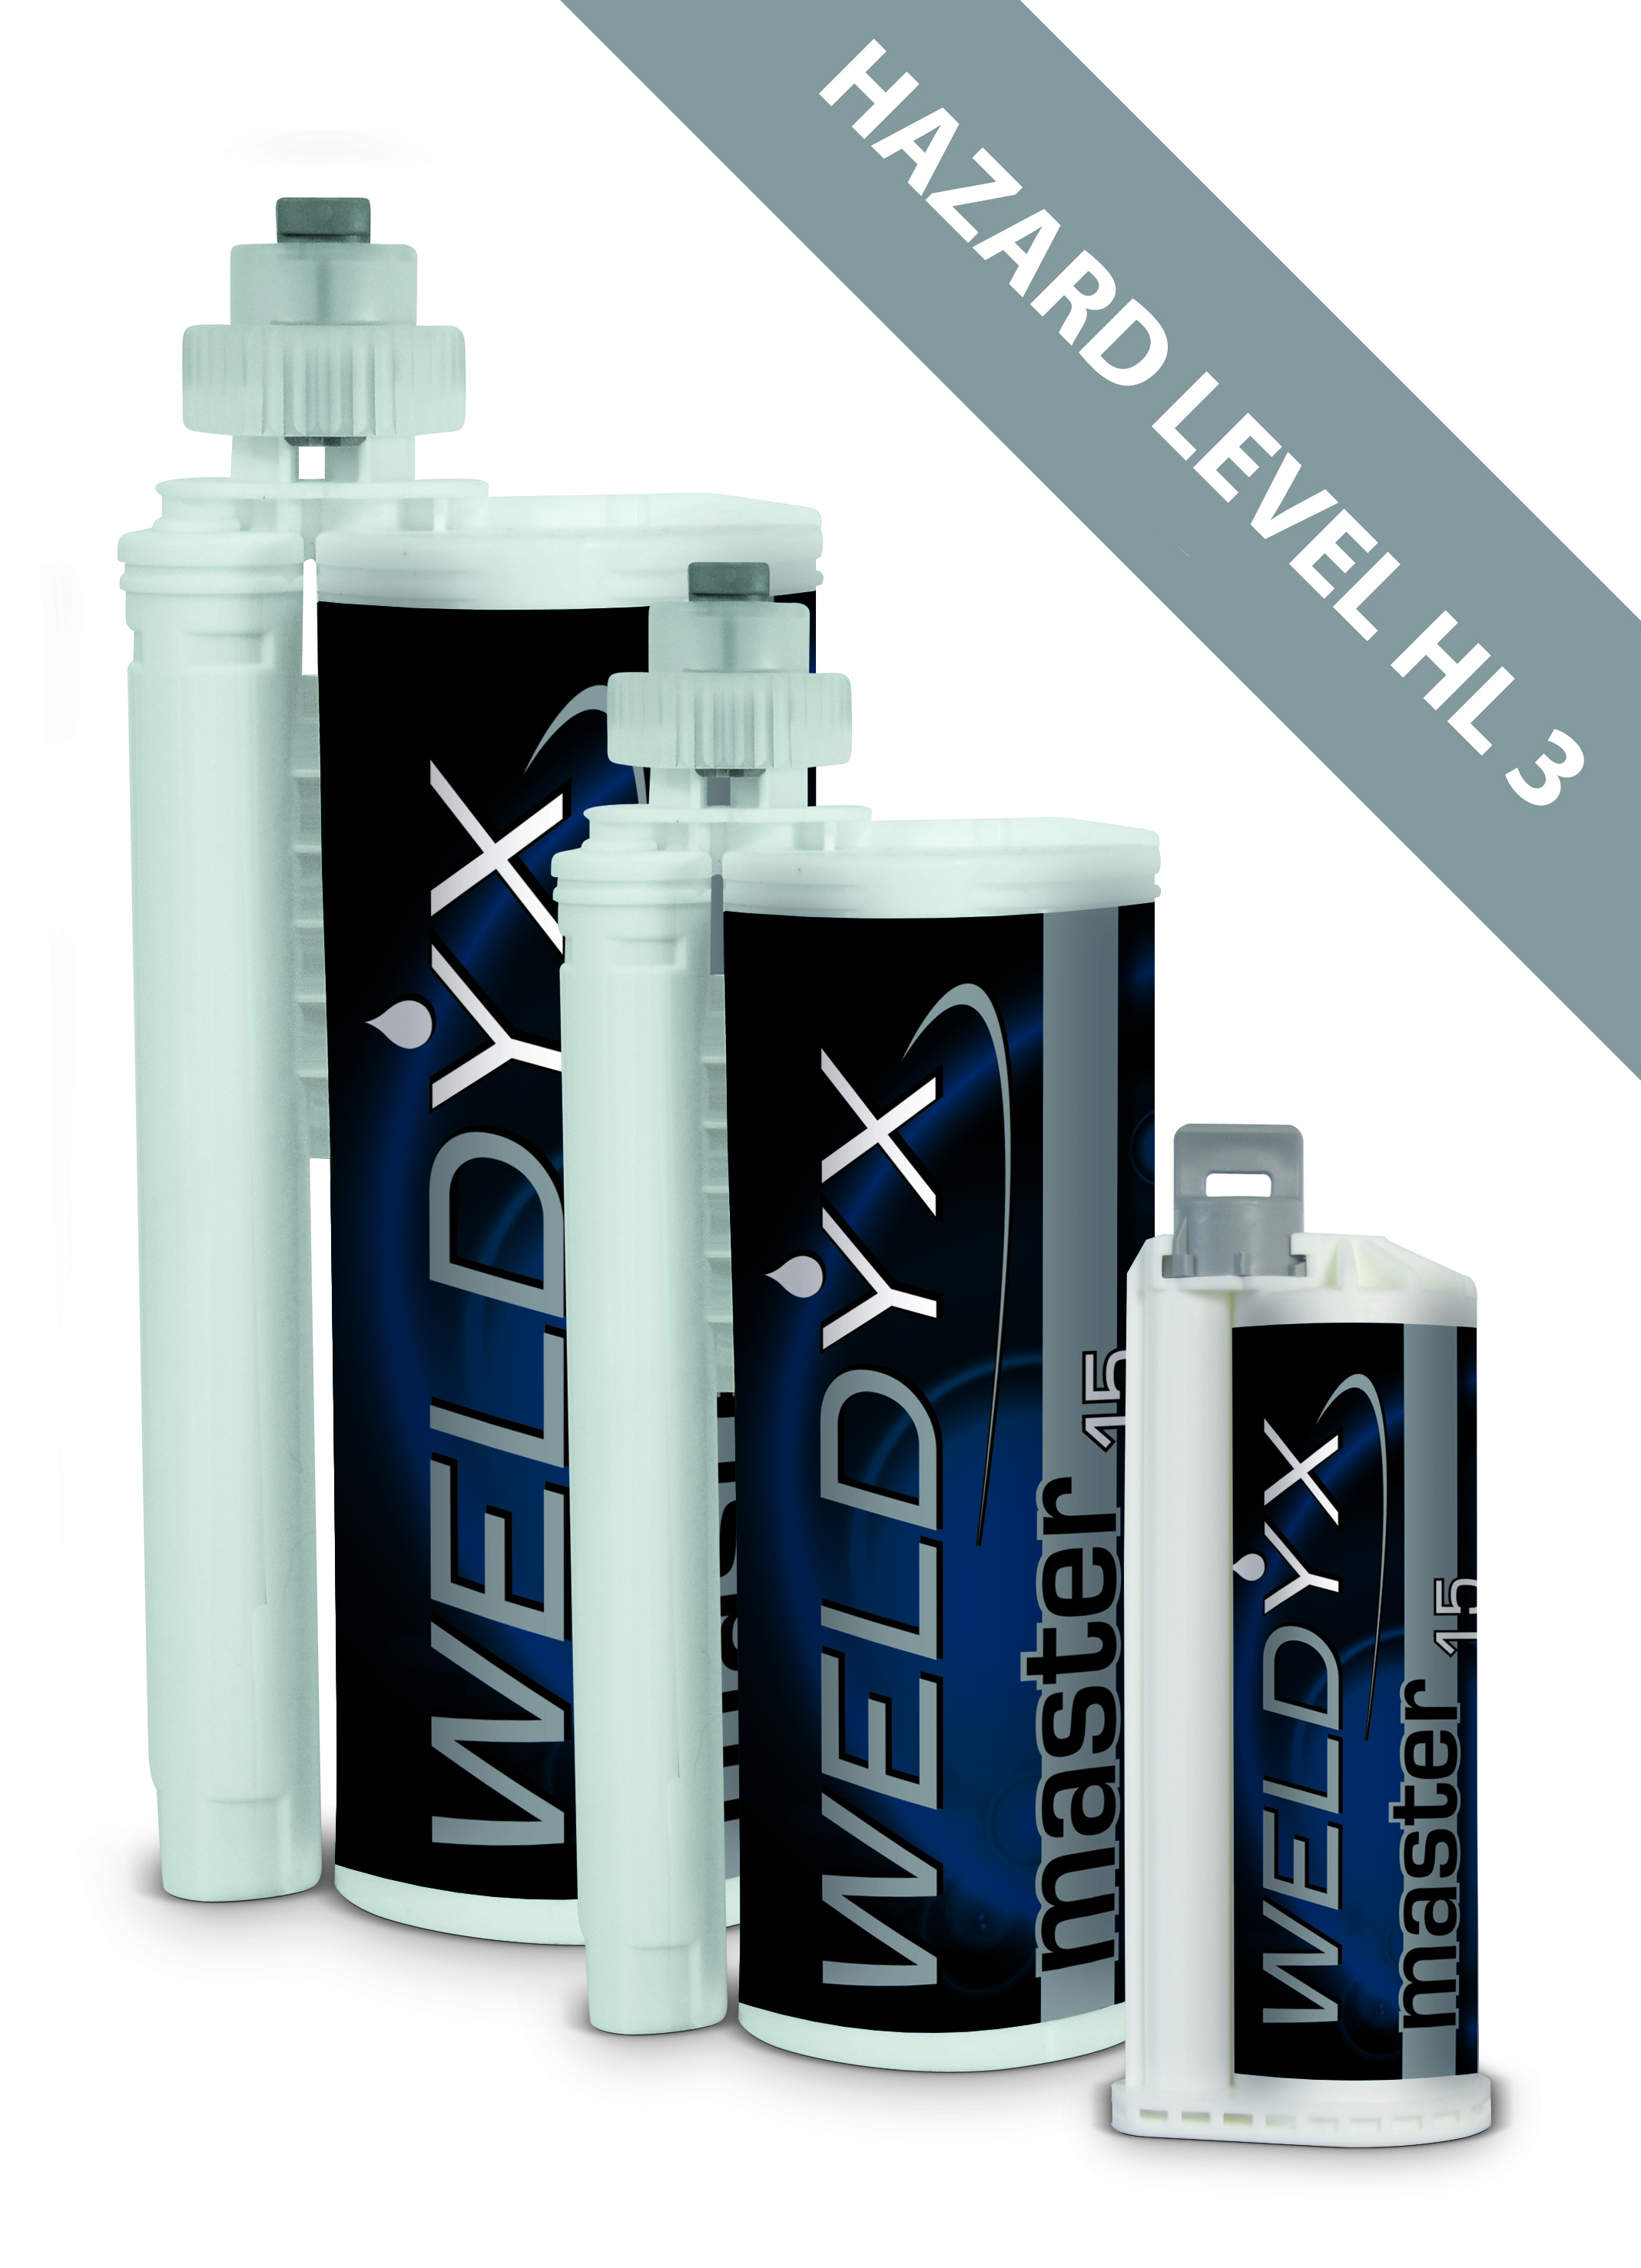 WELDYX MASTER 15: Certified High-performance adhesive with 15 min open time, Hazard Level 3